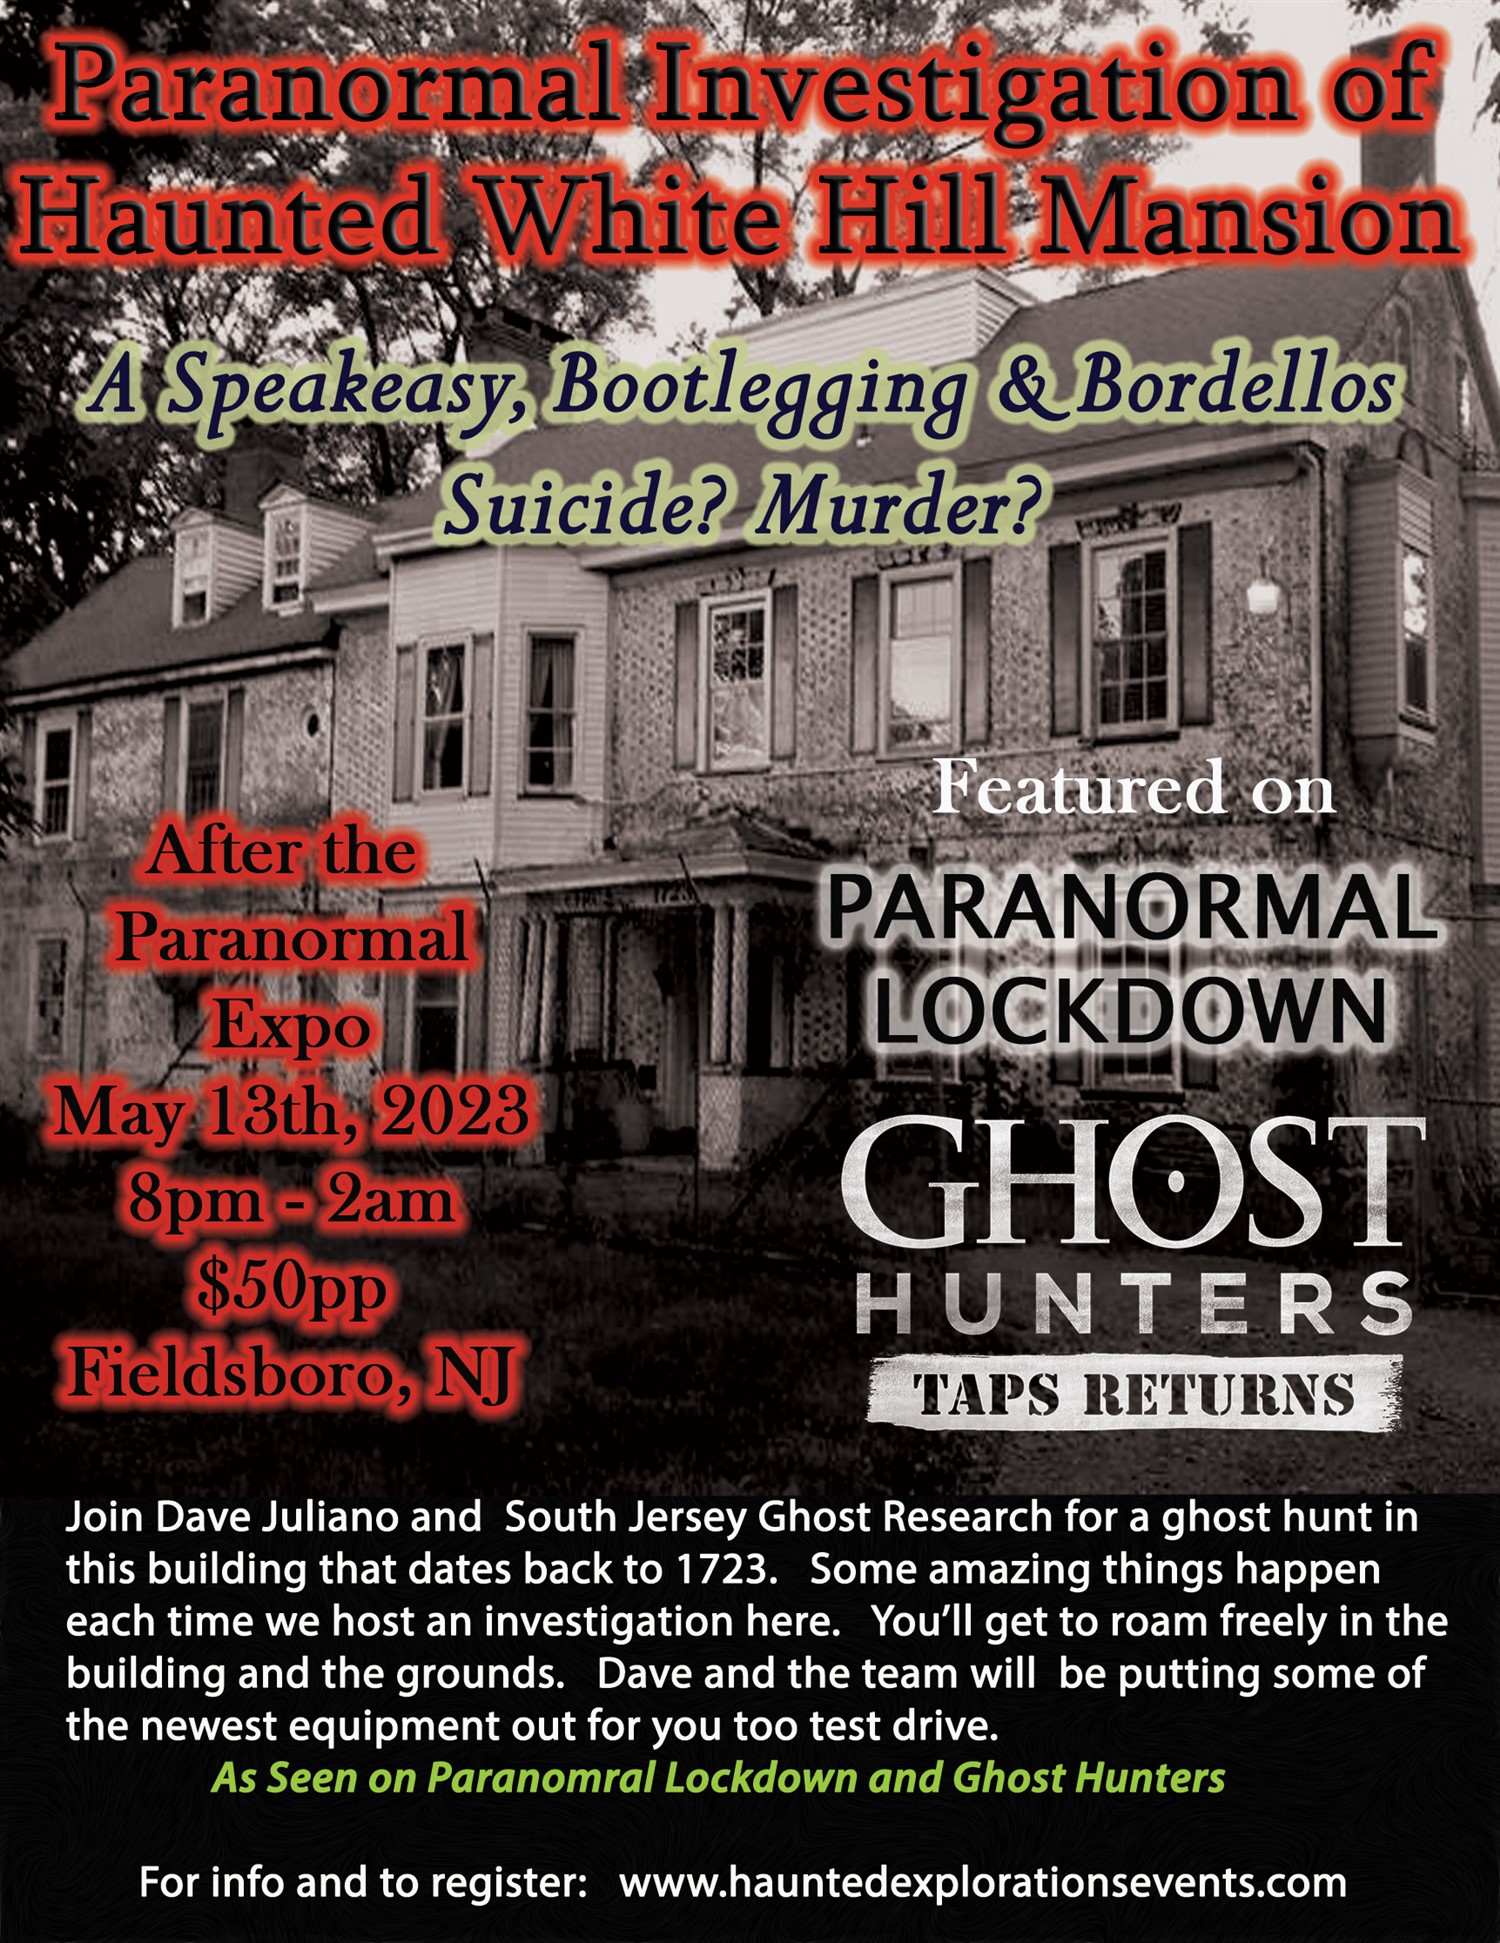 Investigate Whitehill Mansion After the Paranormal Expo on May 13, 20:00@Whitehill Mansion - Buy tickets and Get information on Thriller Events thriller.events